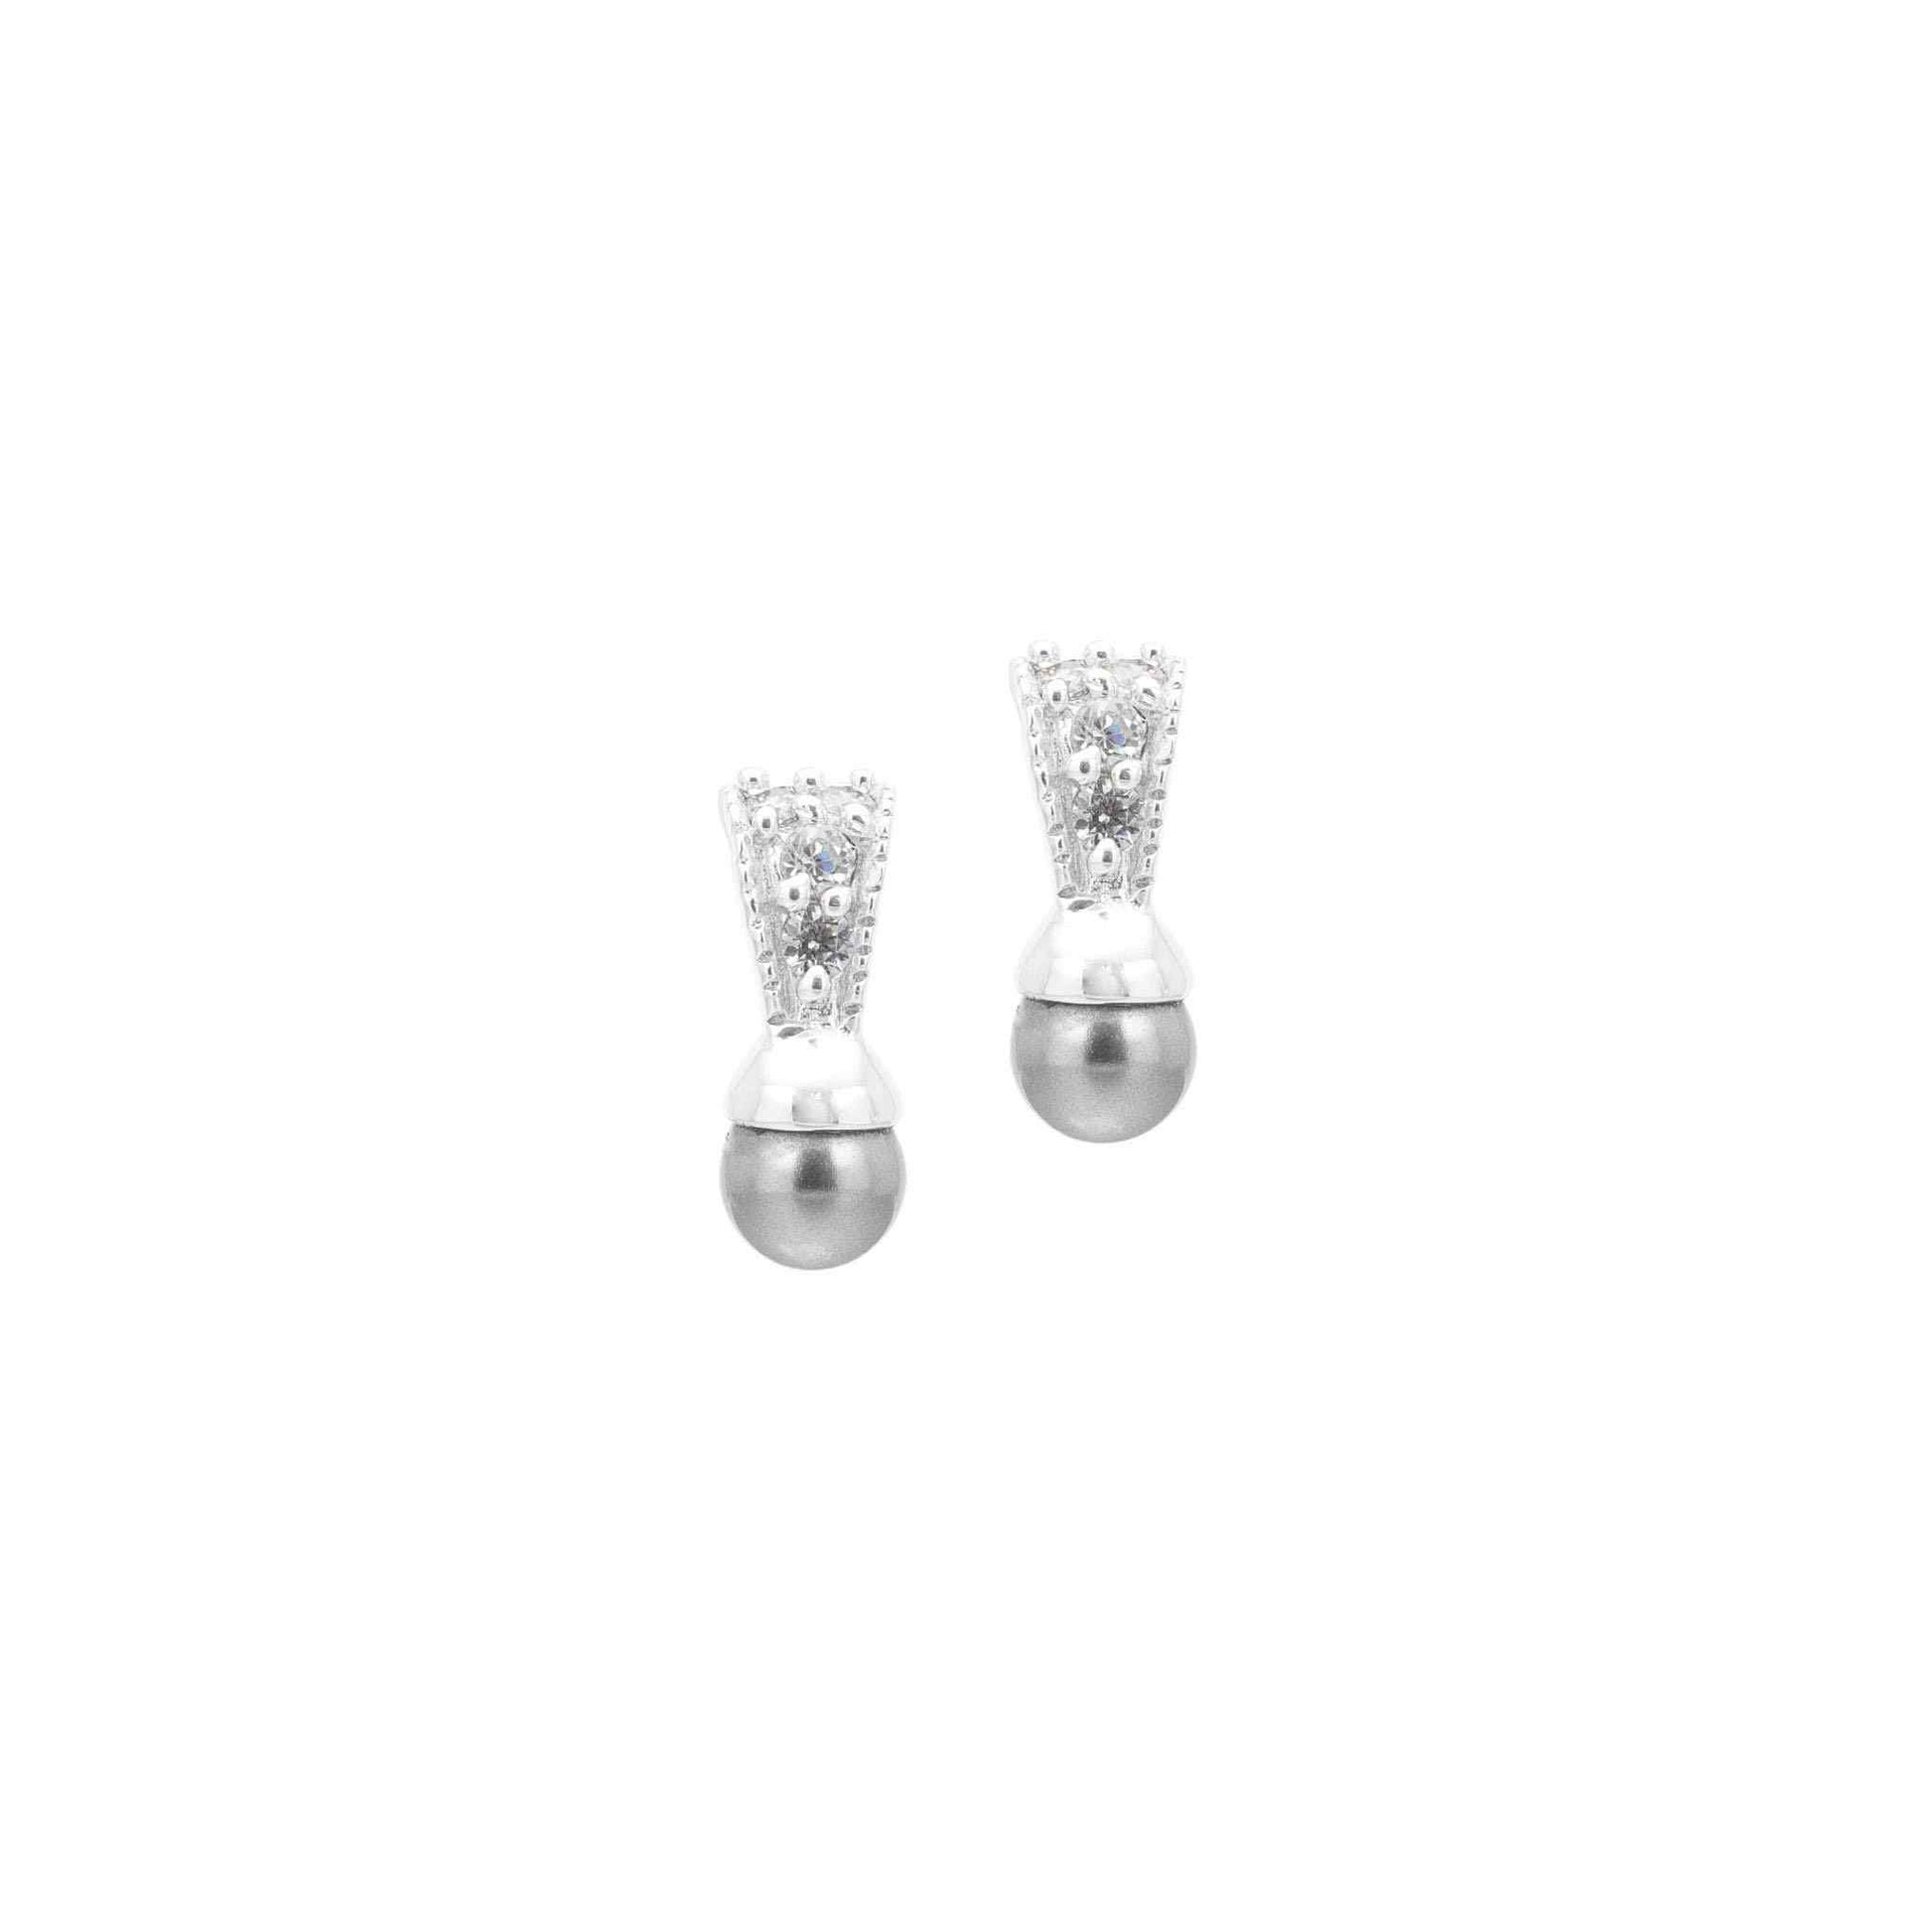 A glass pearl cubic zirconia earrings displayed on a neutral white background.